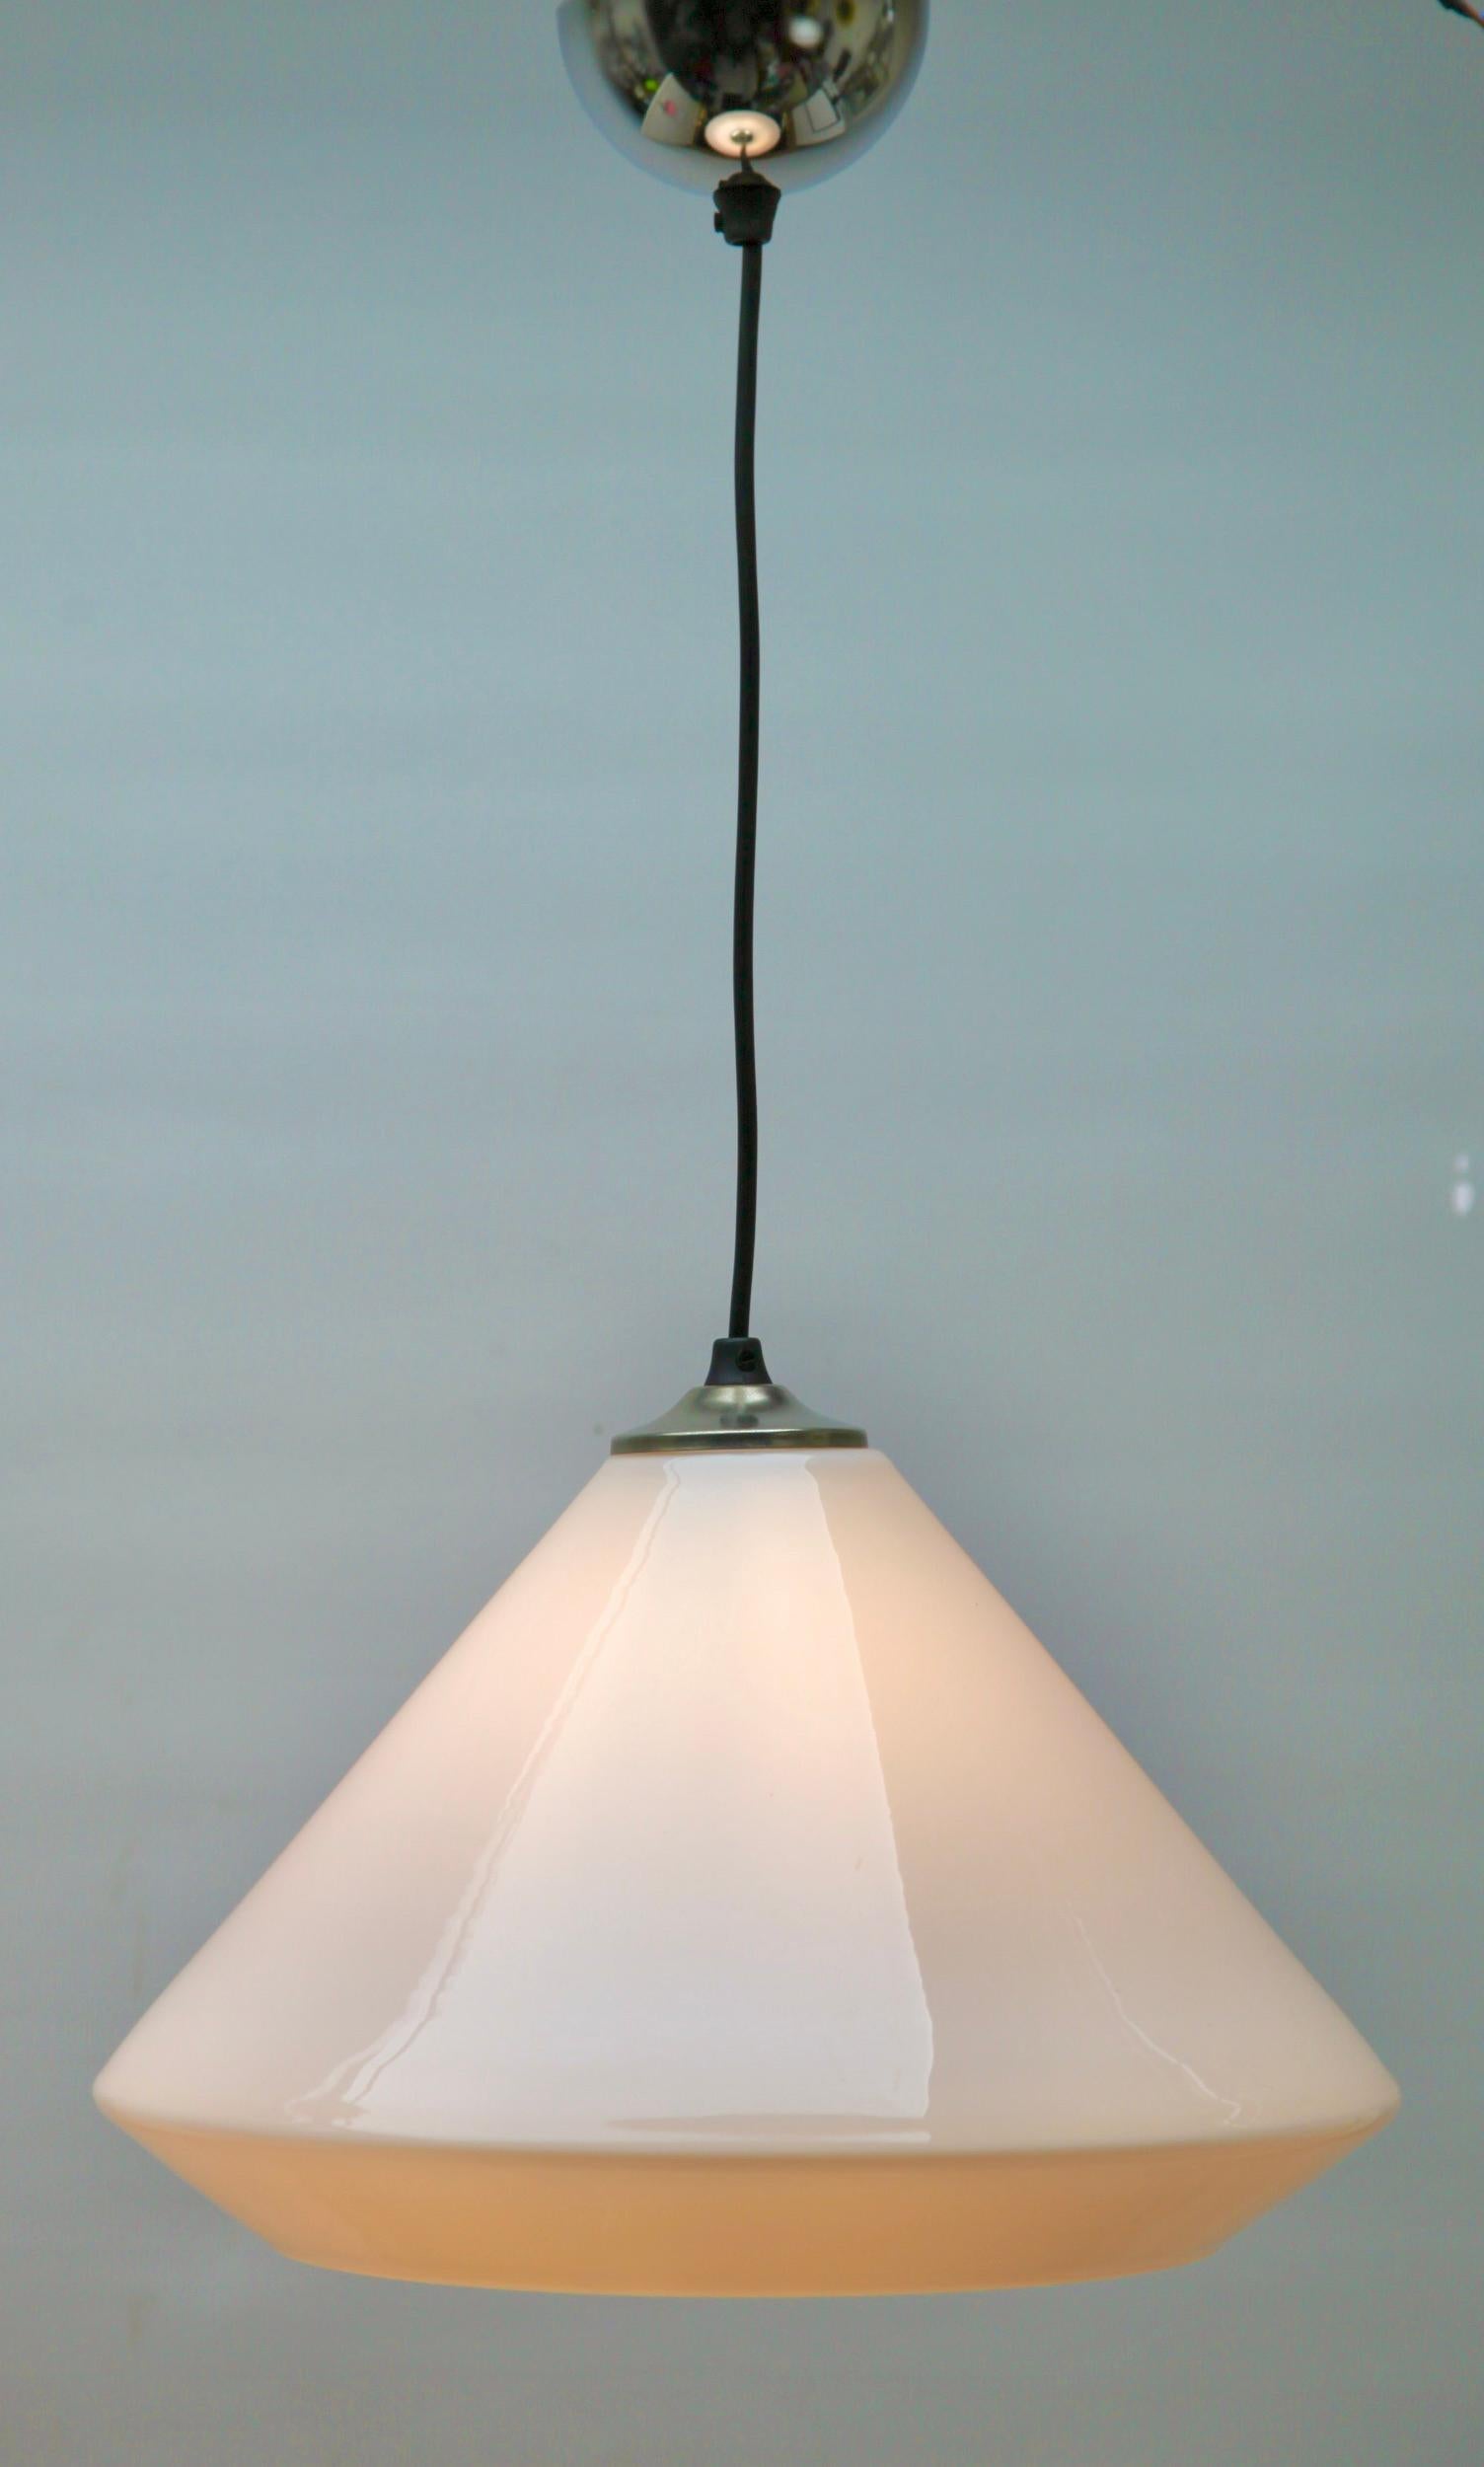 From the range by the Phillips Company, this center-light on a central chain. The lamp has a fitting on a chromed plate and holds a stepped globular shade of opaline glass.

In good condition and in full working order with standard new lamp